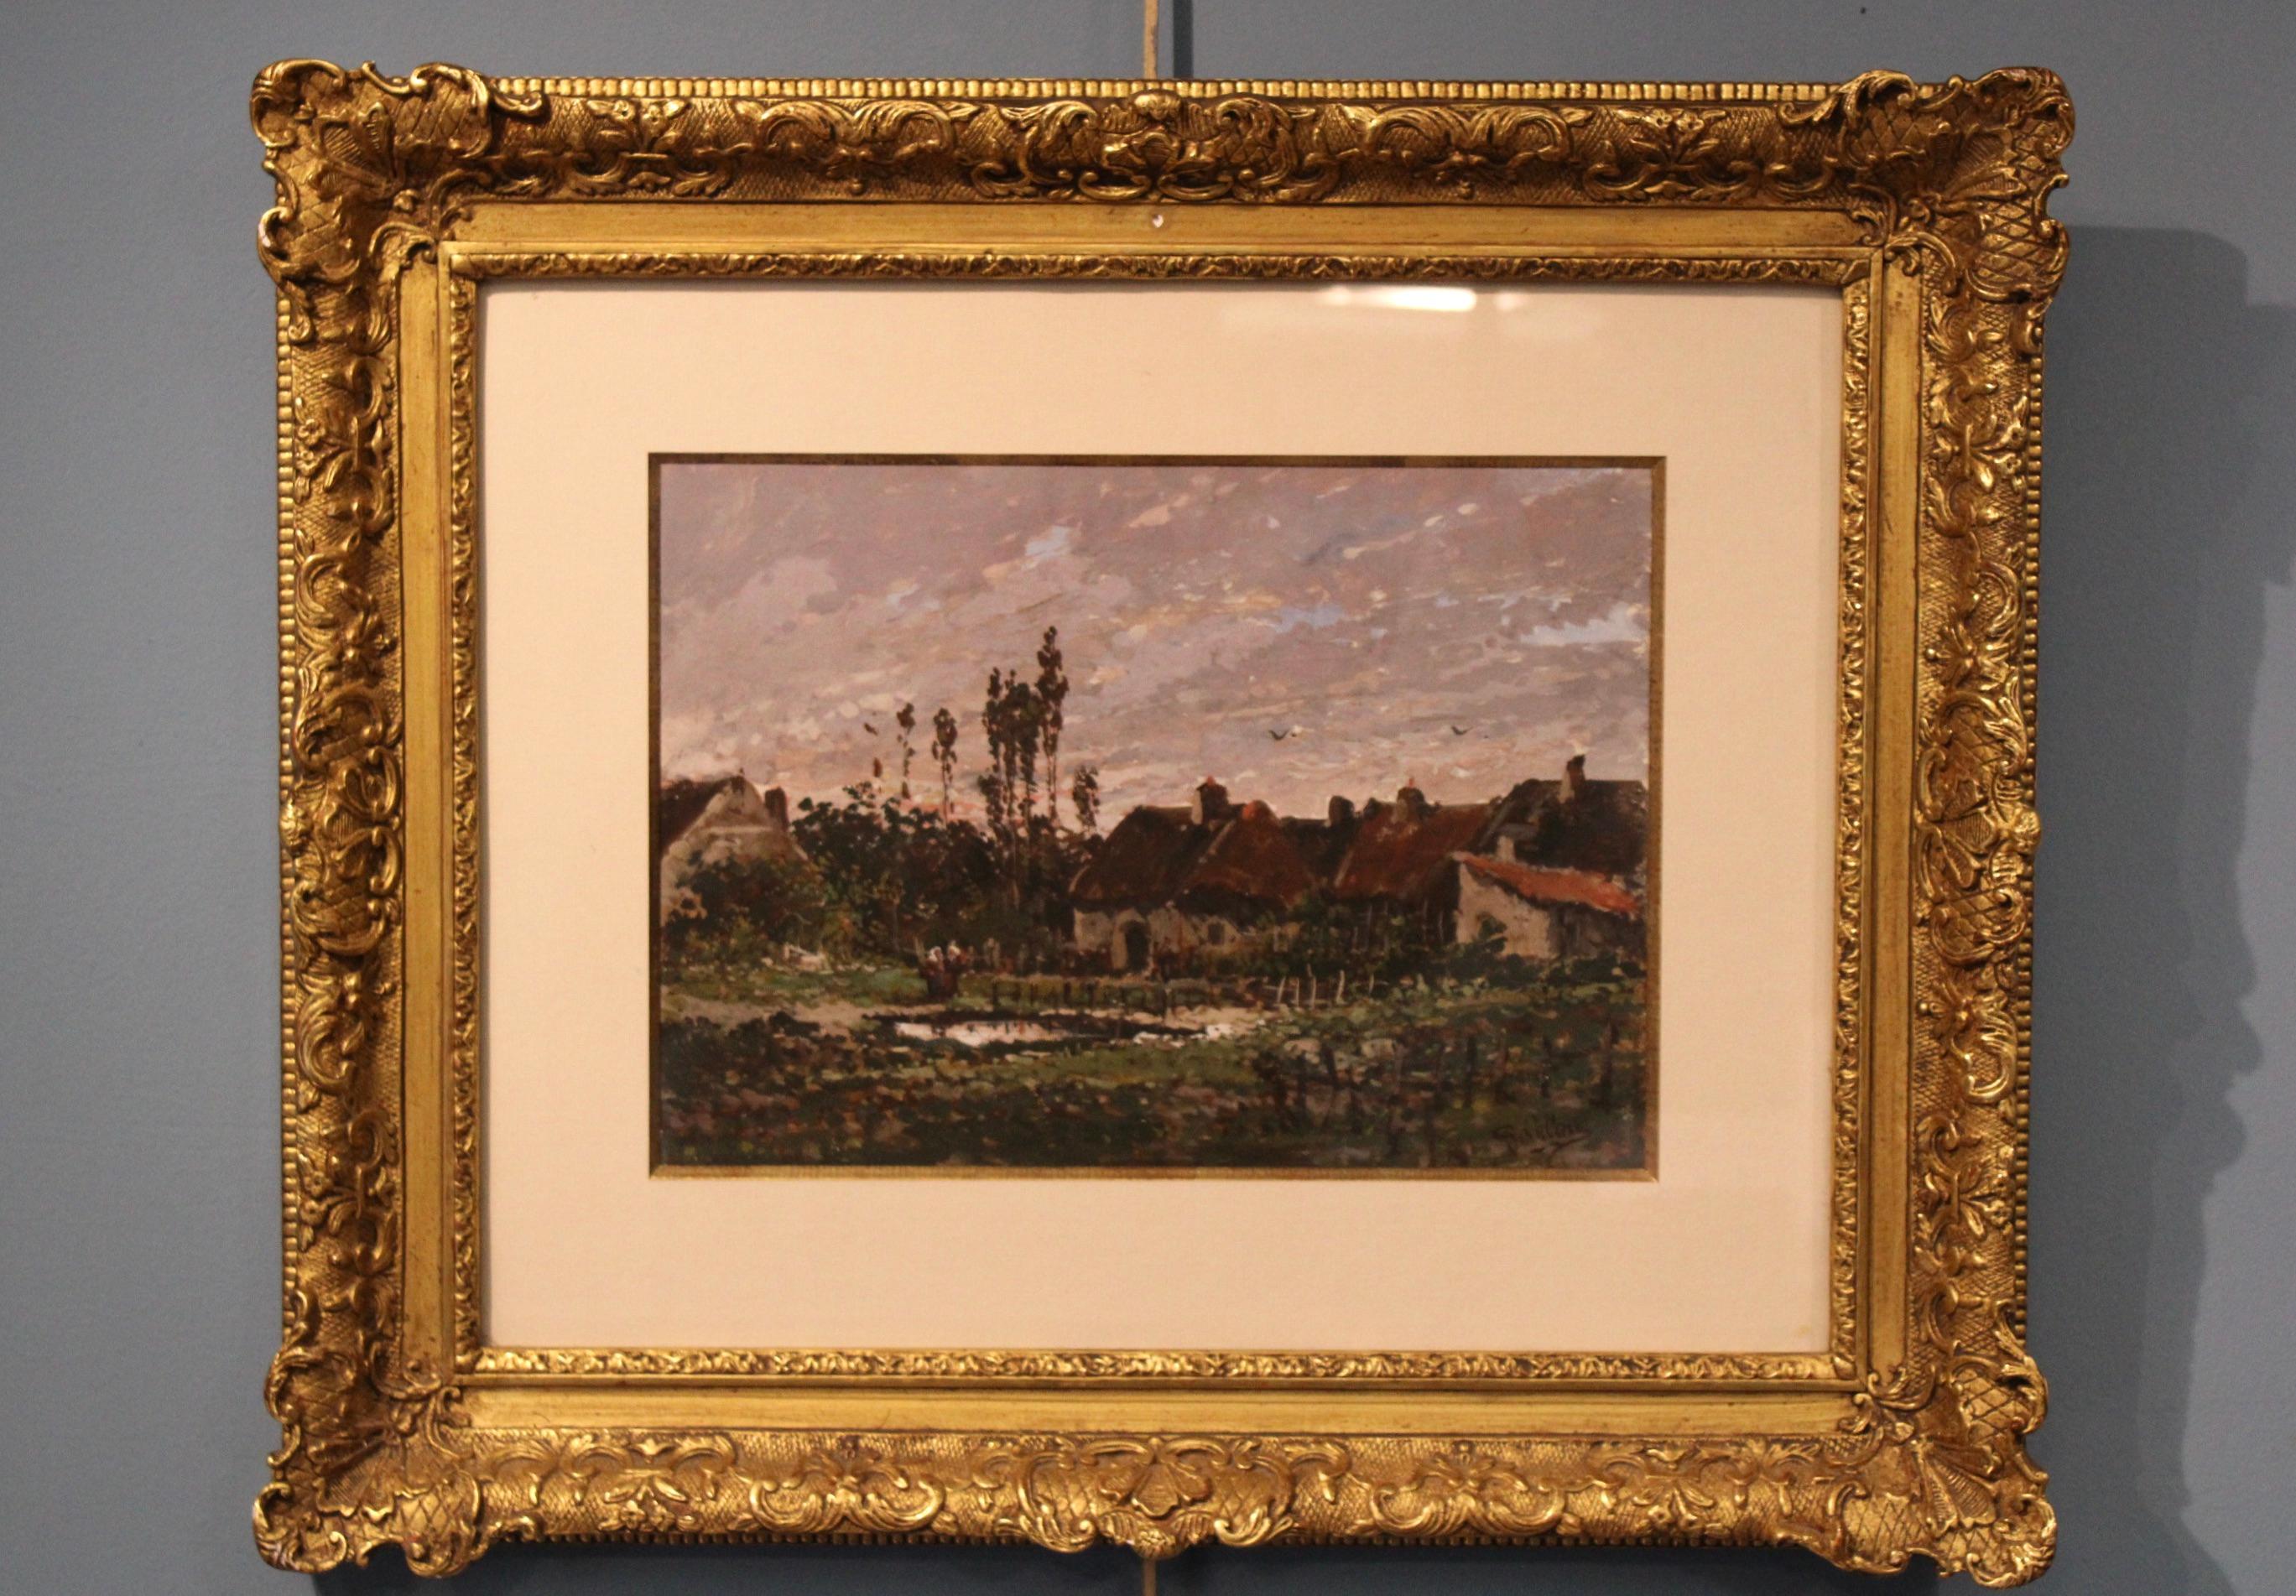 Painting by Eugène Galien-Laloue (1854-1941), French landscape painter. 
Gouache painting signed lower right. 
Dimensions at sight: 30 x 21 cm.